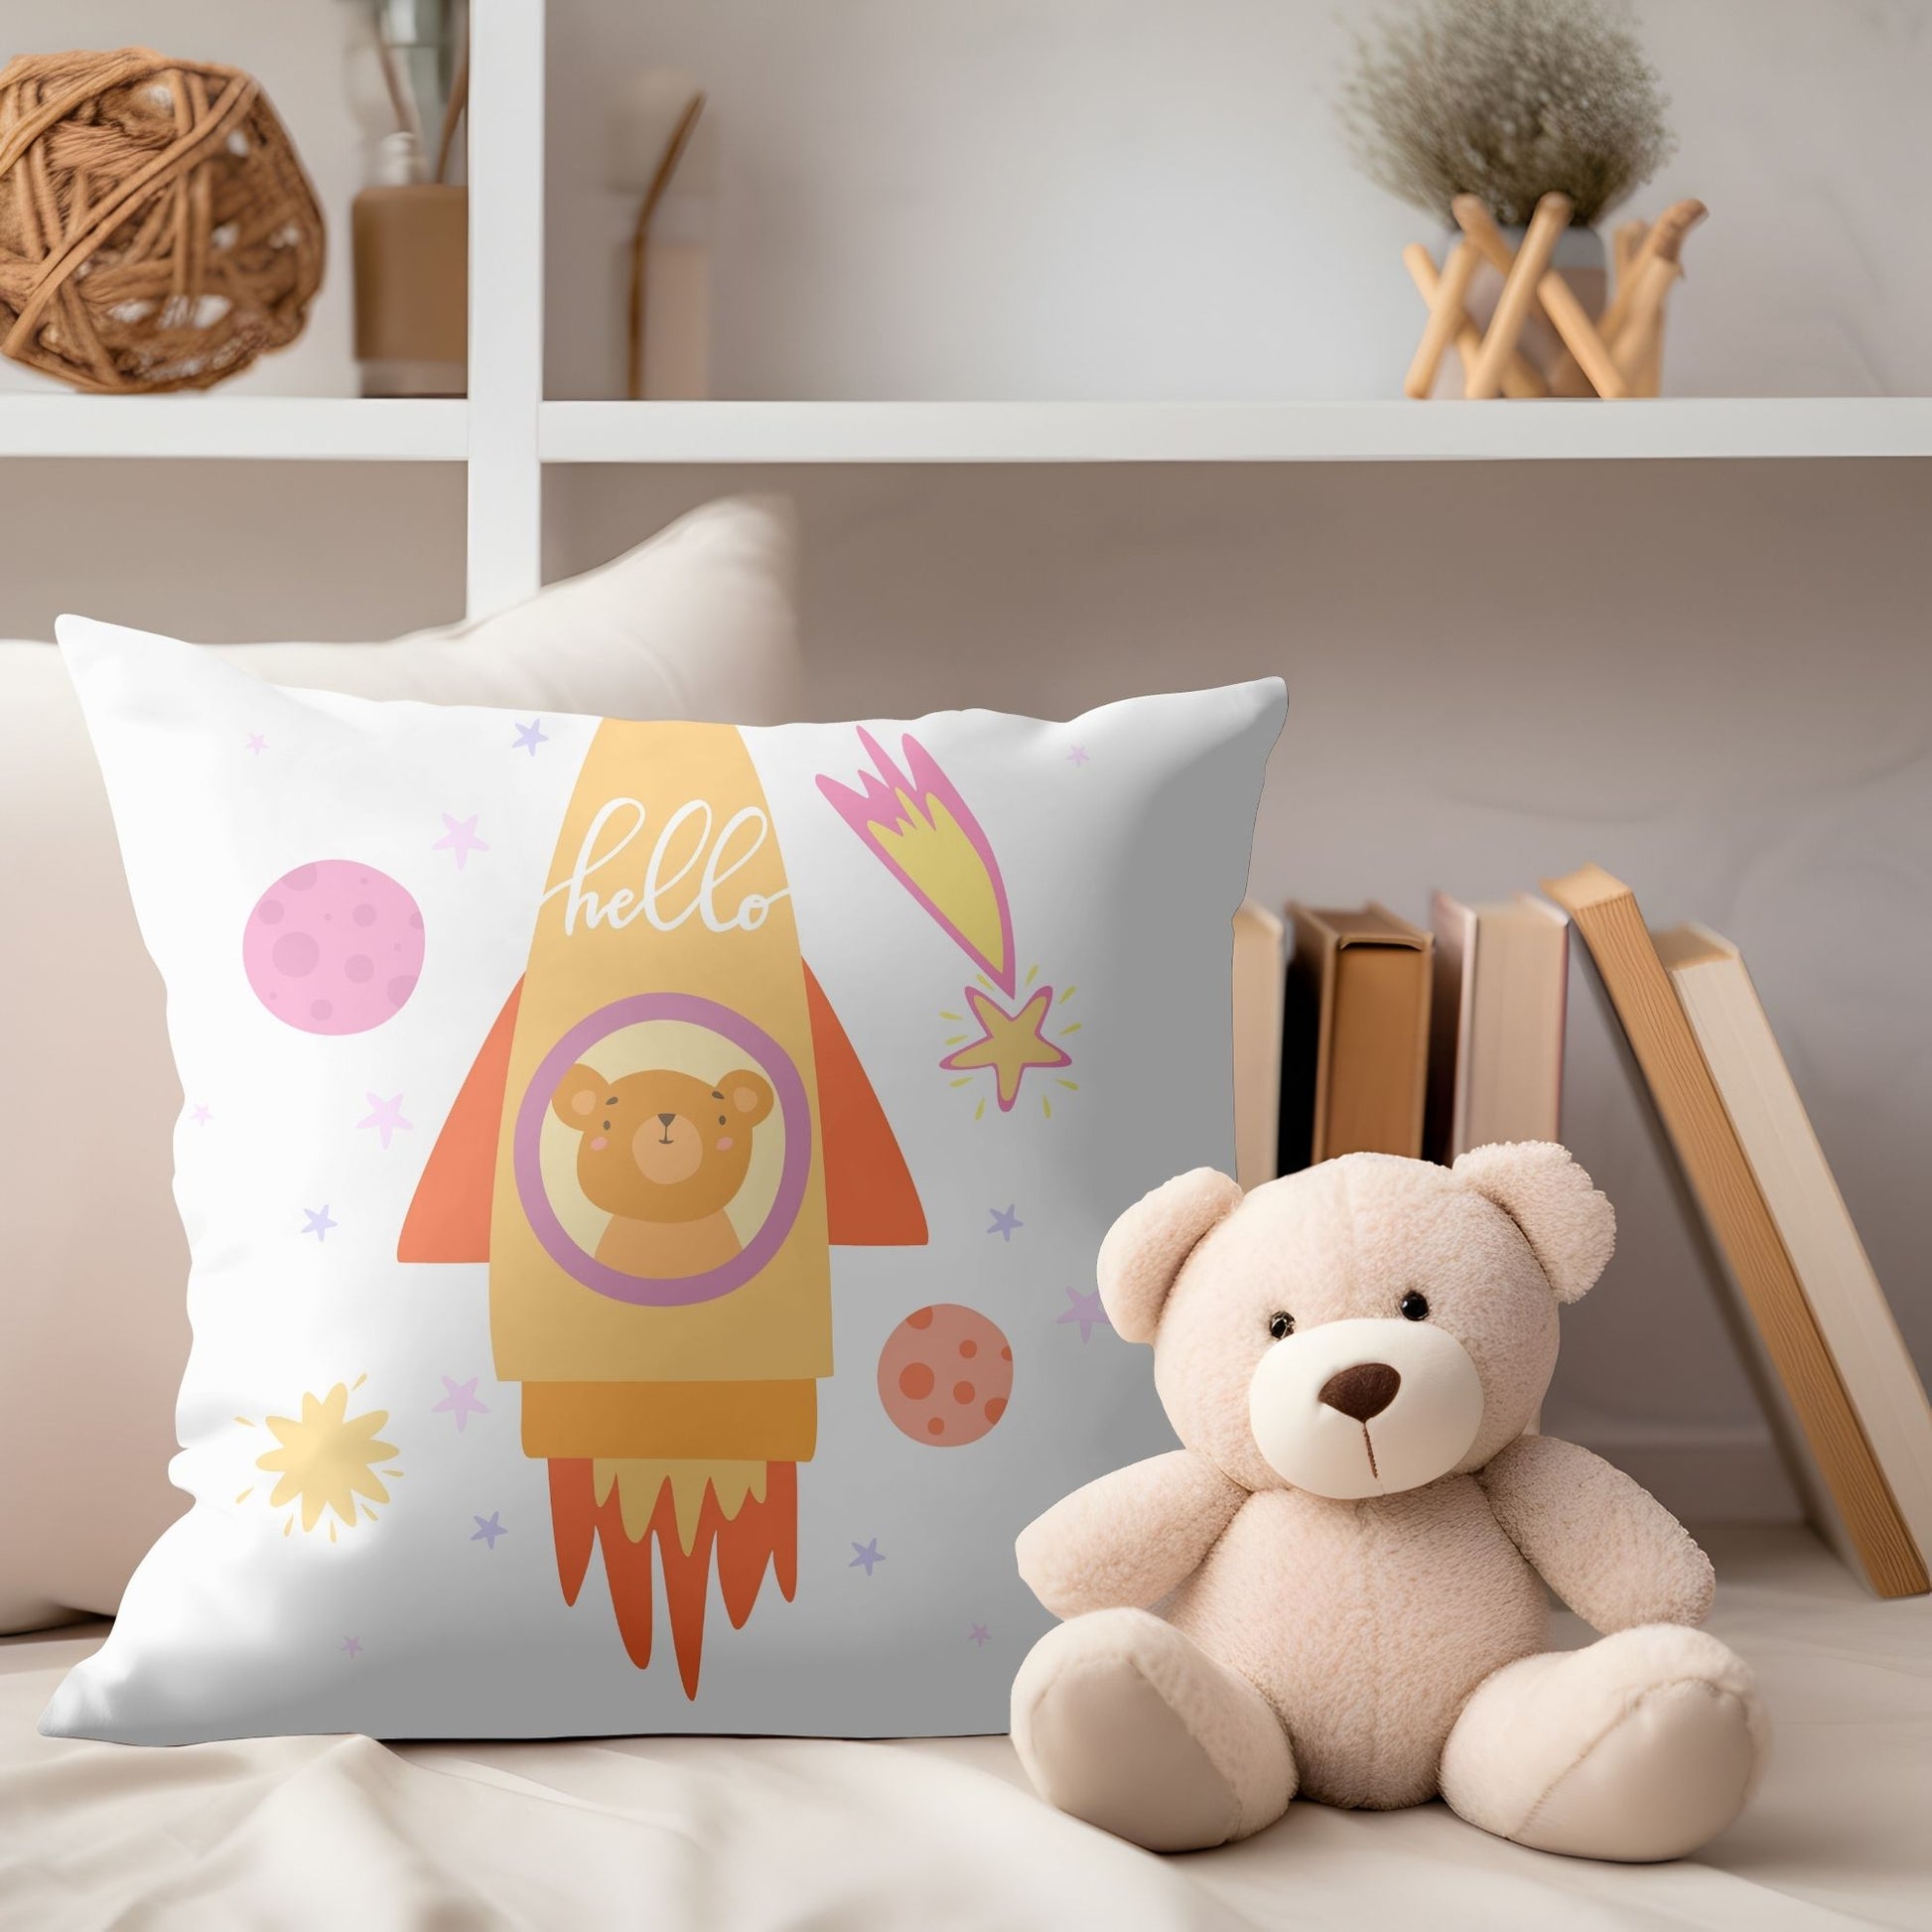 Soft and cuddly bear-themed rocket baby pillow for nursery comfort.